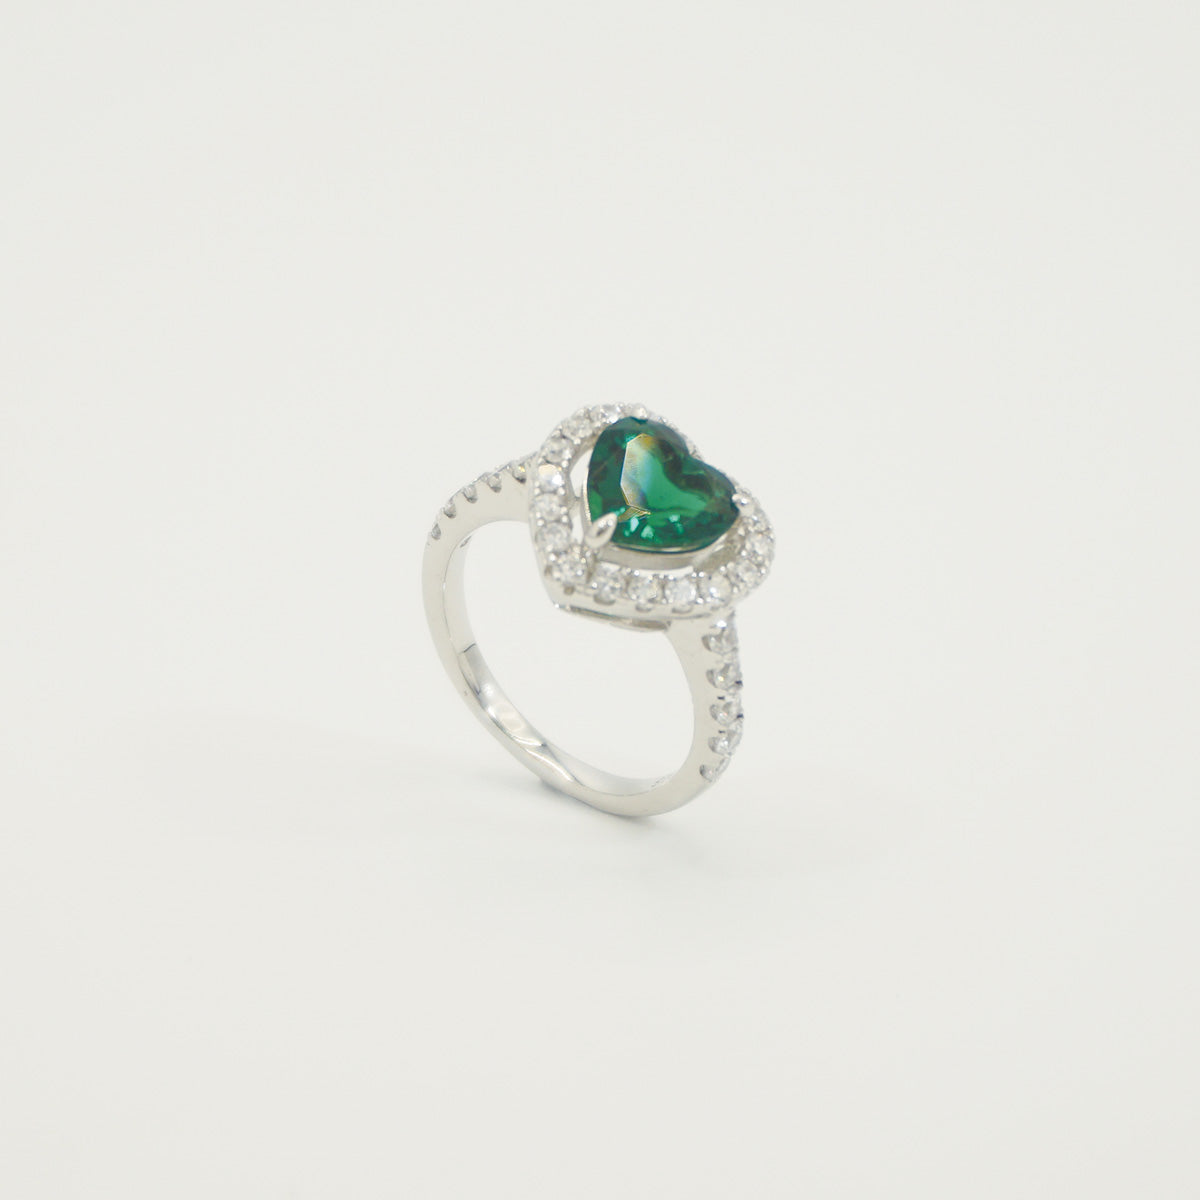 White Gold Heart Emerald Signet Ring with Worldwide Setting Stones